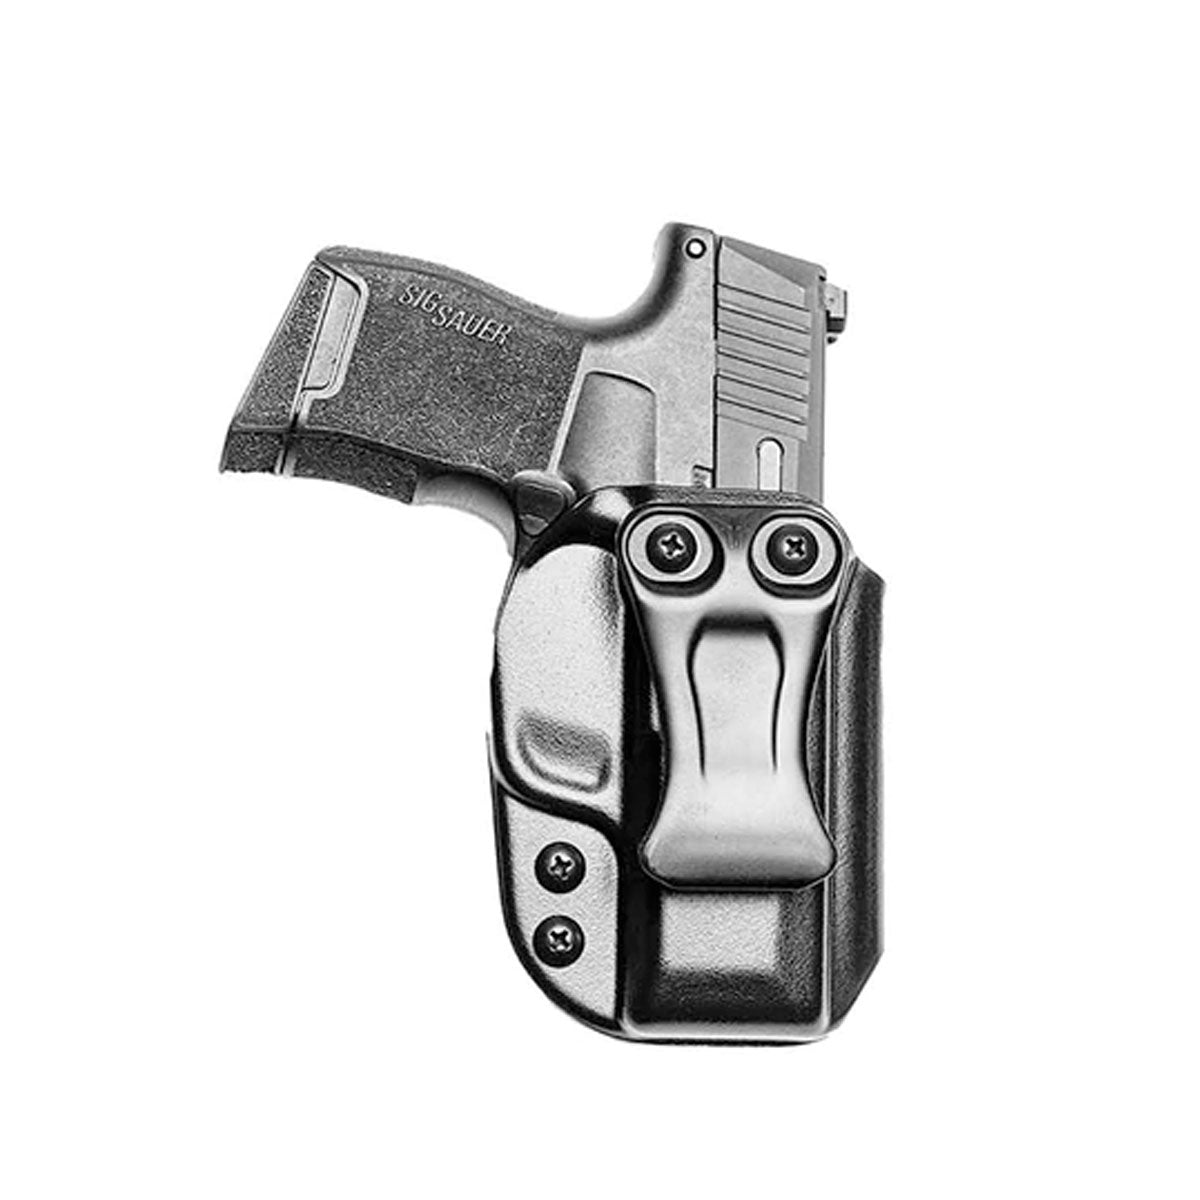 Blade-Tech Nano IWB Holster Black Right Hand Only Holsters Blade-Tech Holsters Sig / P365 Tactical Gear Supplier Tactical Distributors Australia